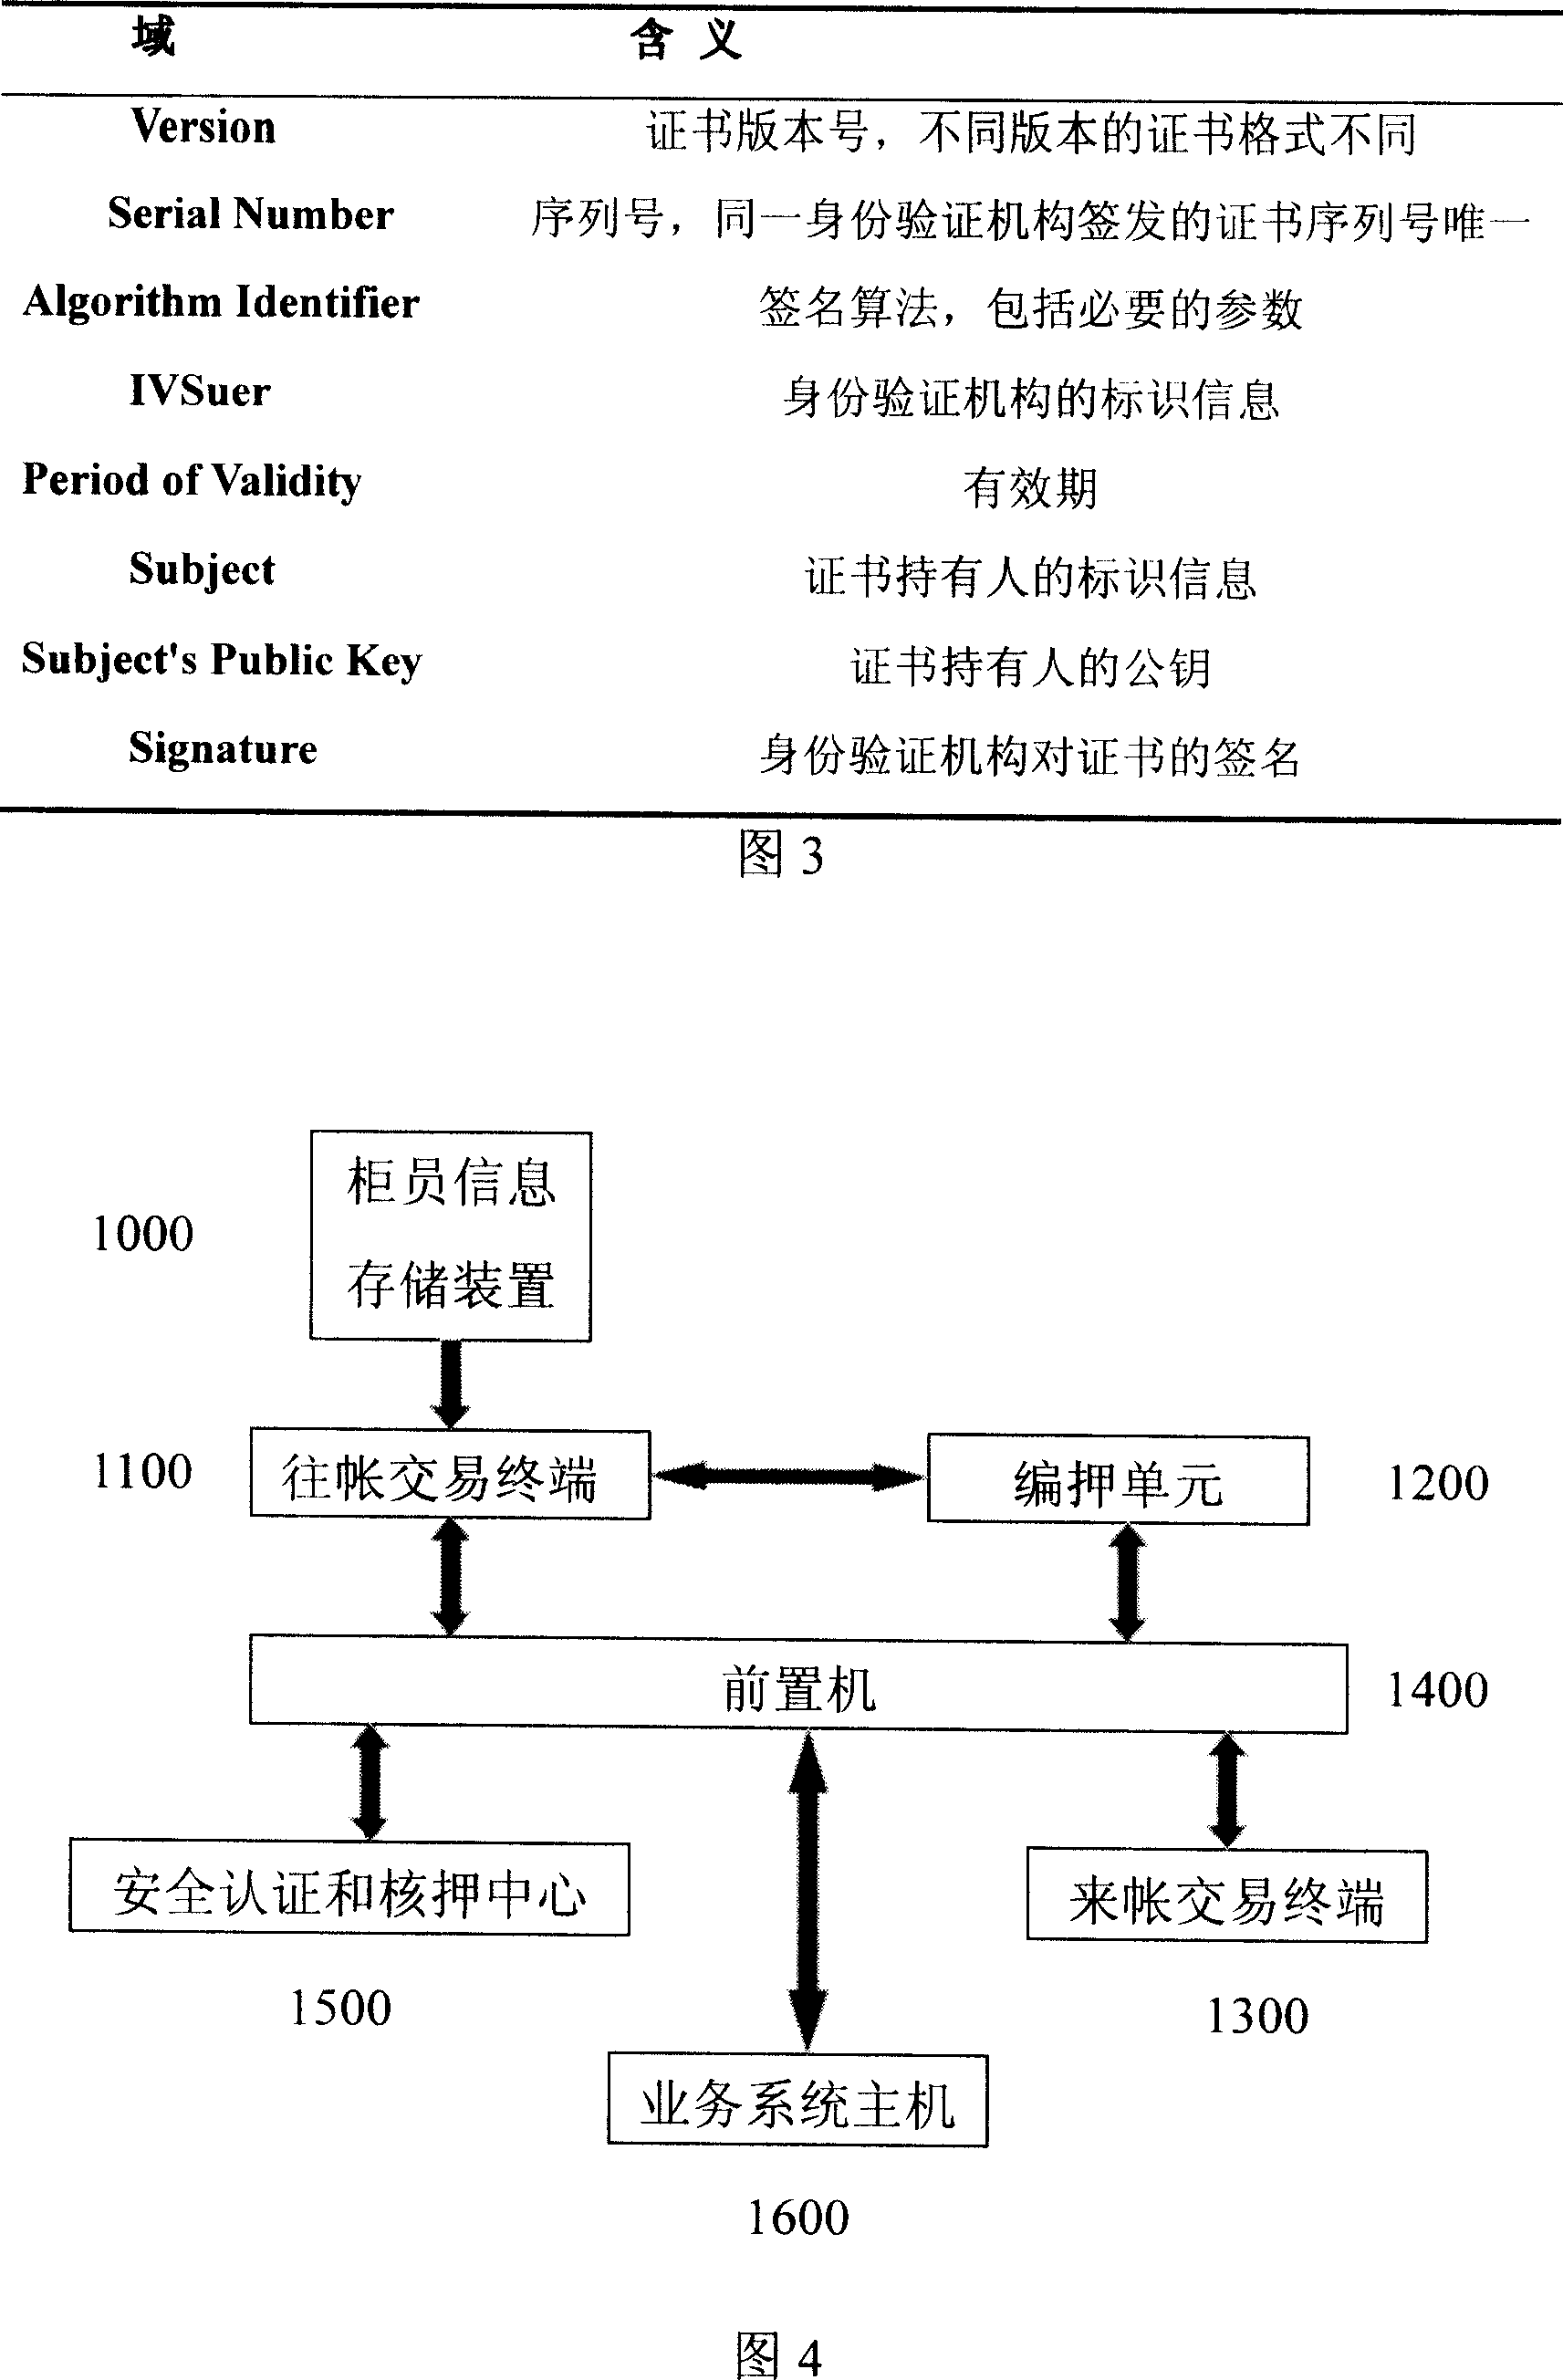 Data ciphered-mortgage transaction system, teller identification system, trans-center transaction system and method